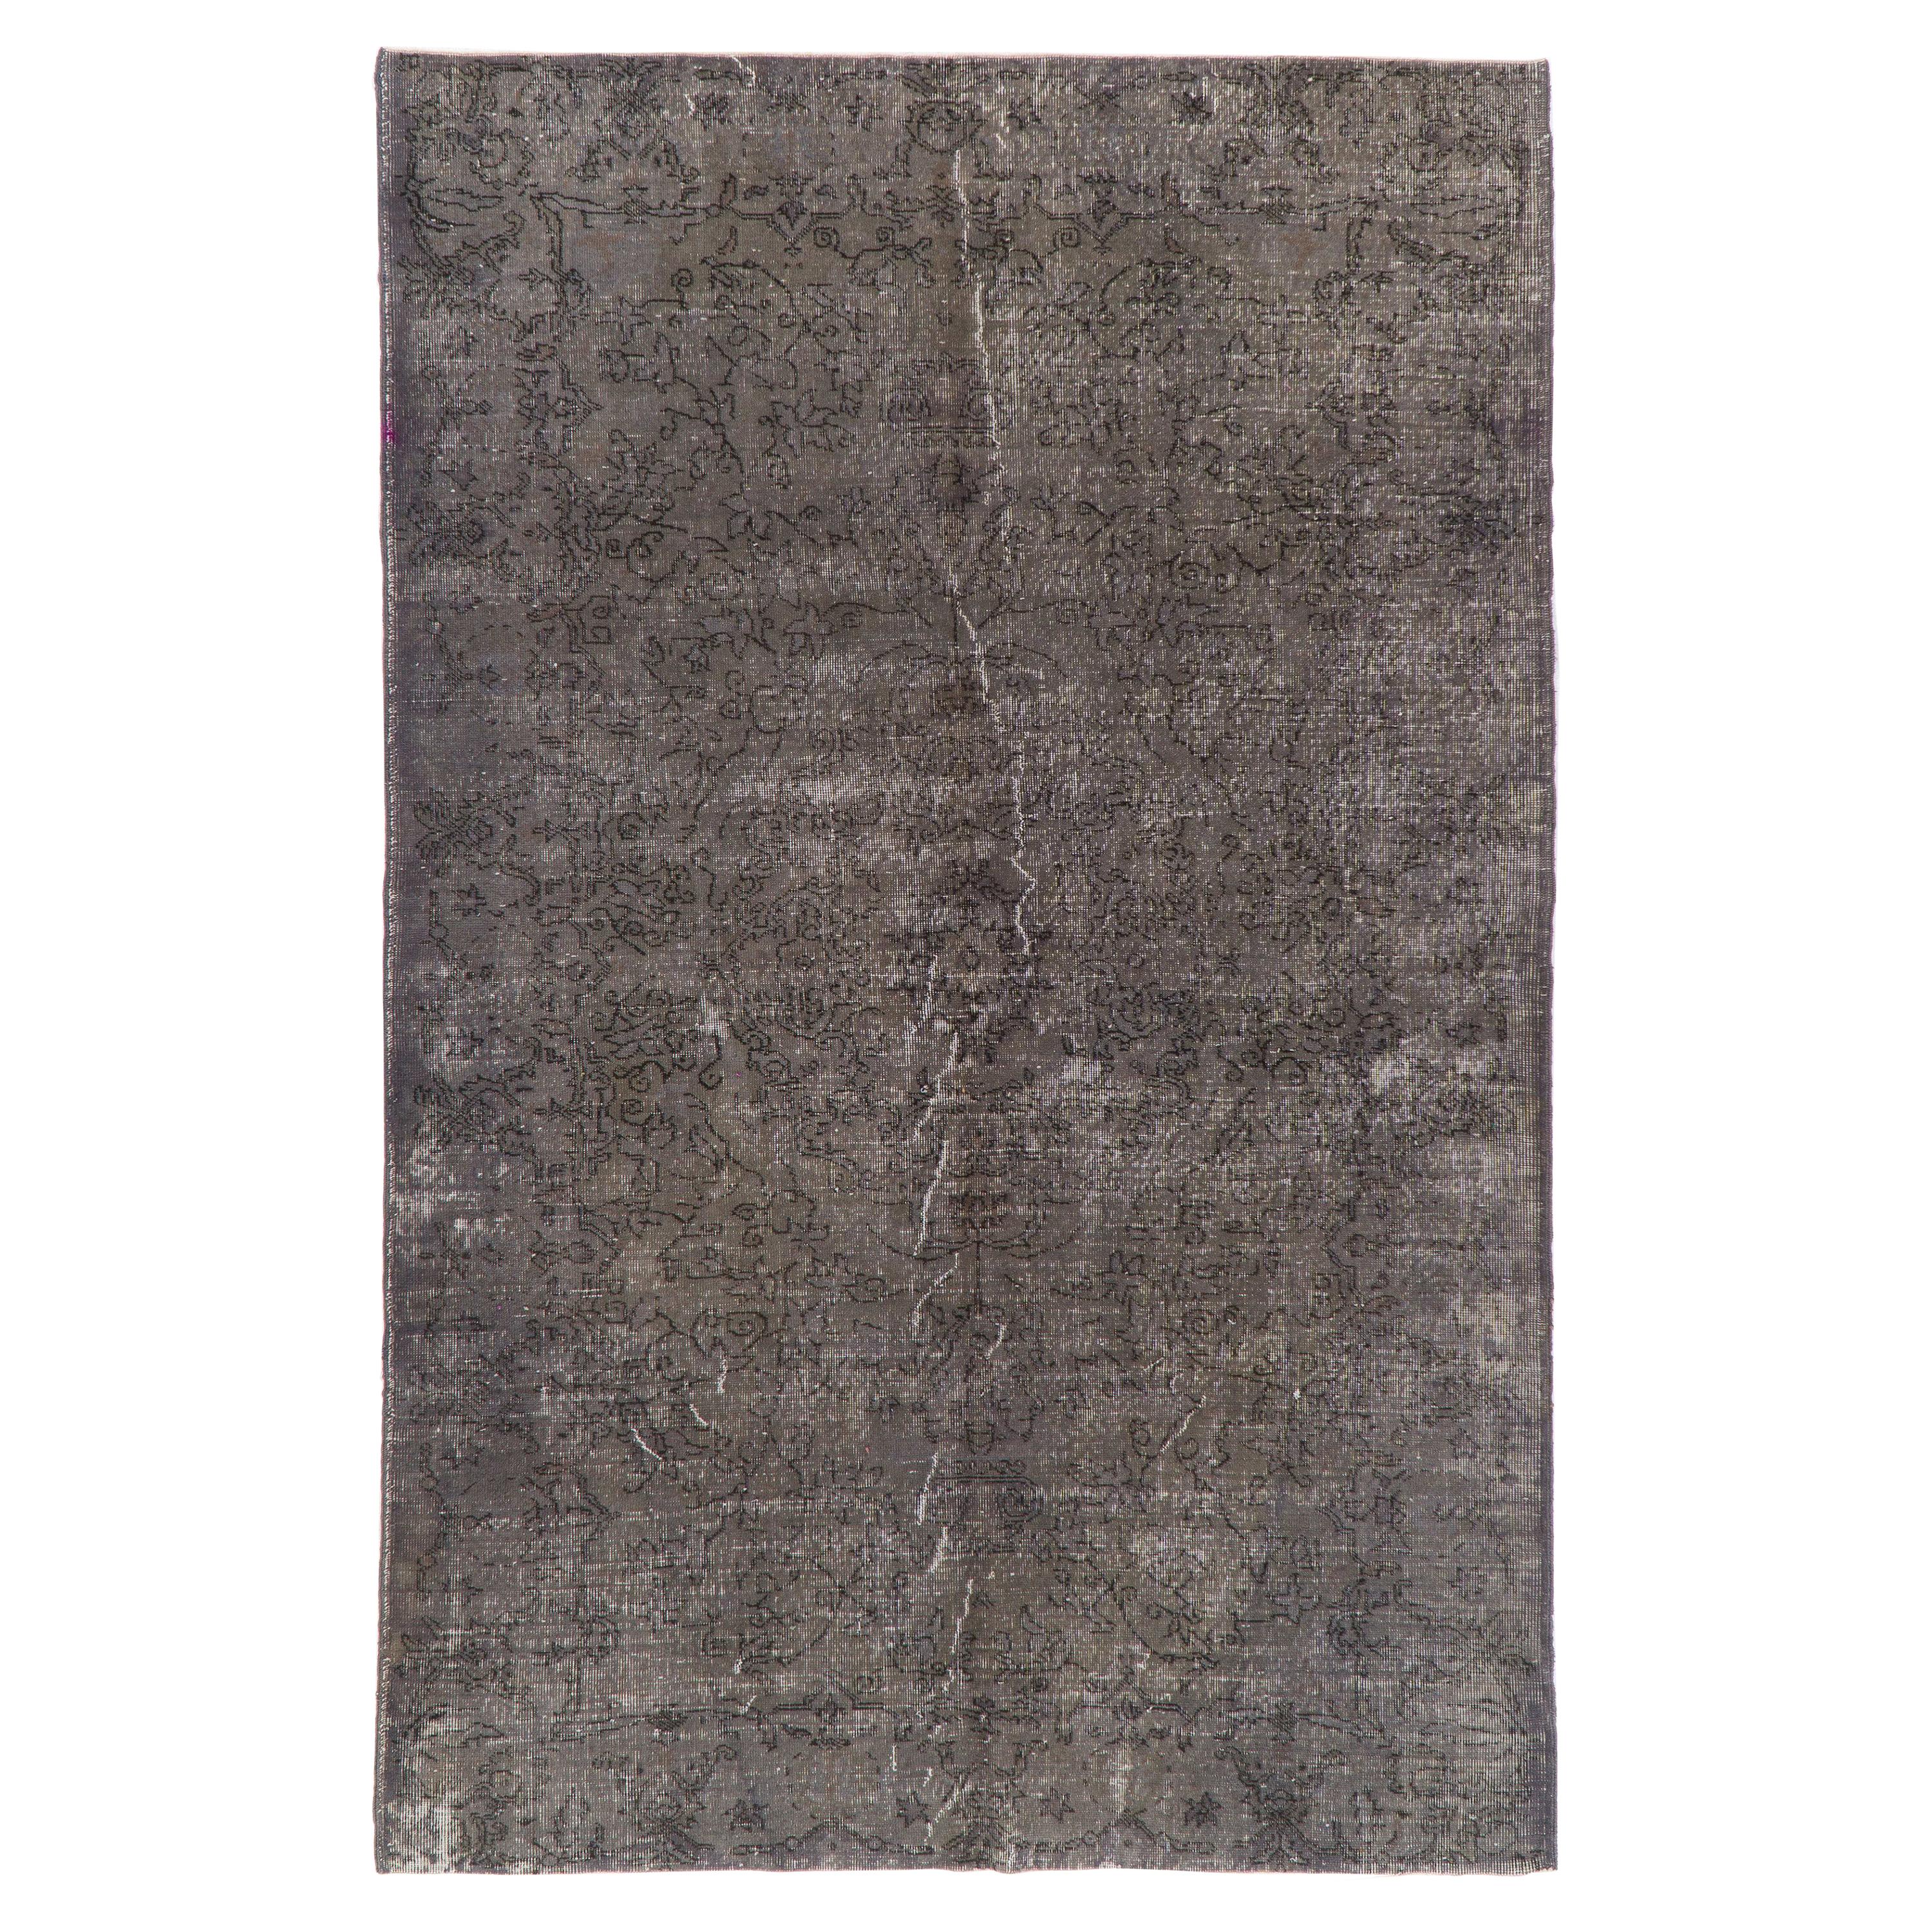 6.3x9.8 ft Vintage Minimalist Distressed Hand-Knotted Turkish Area Rug in Gray For Sale